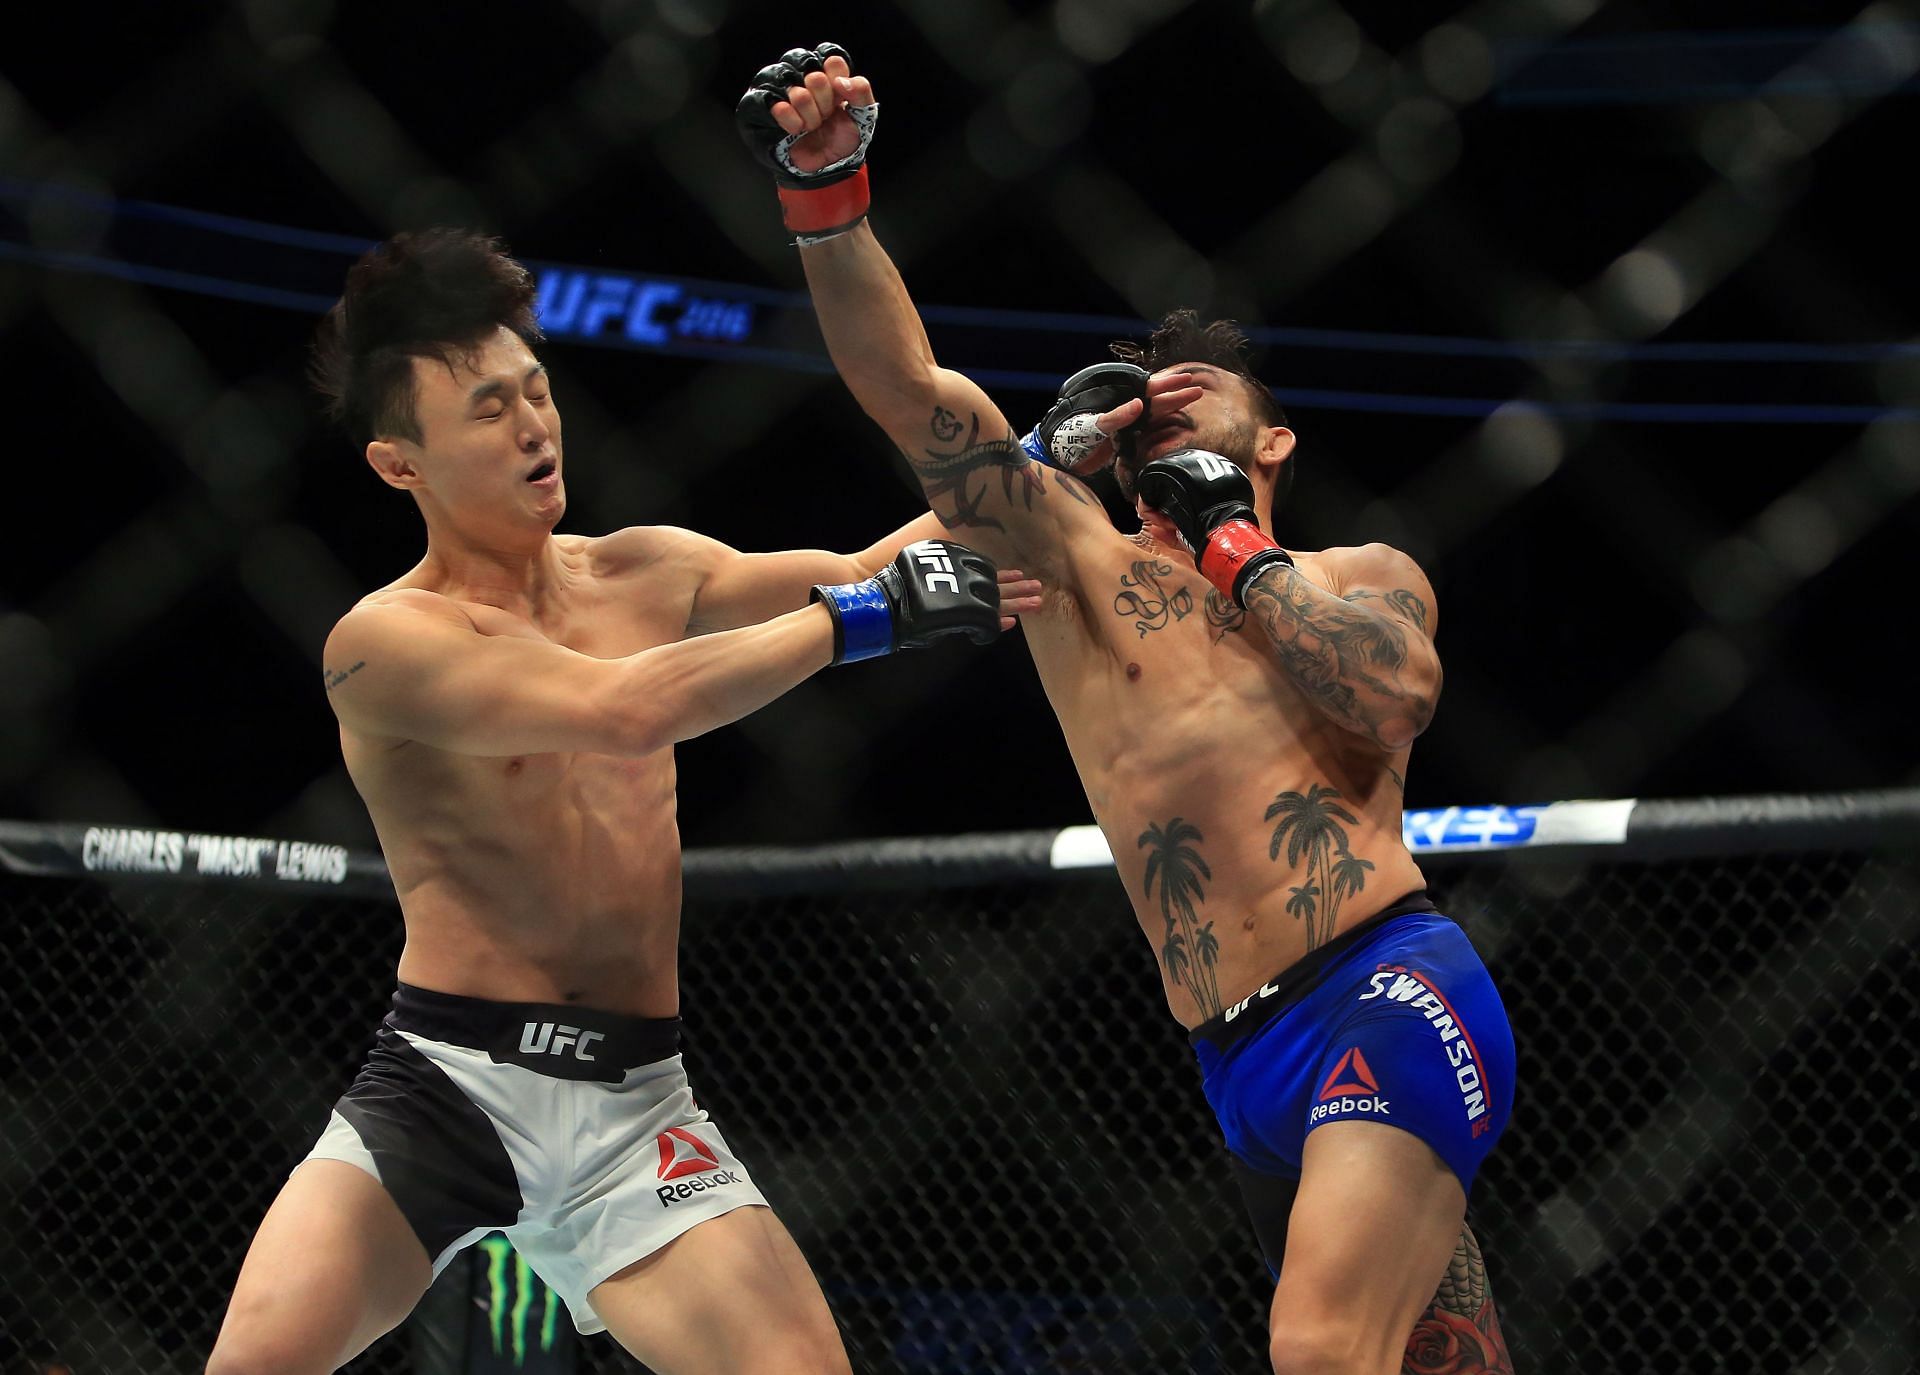 Doo Ho Choi has been part of some of the craziest fights in UFC featherweight history